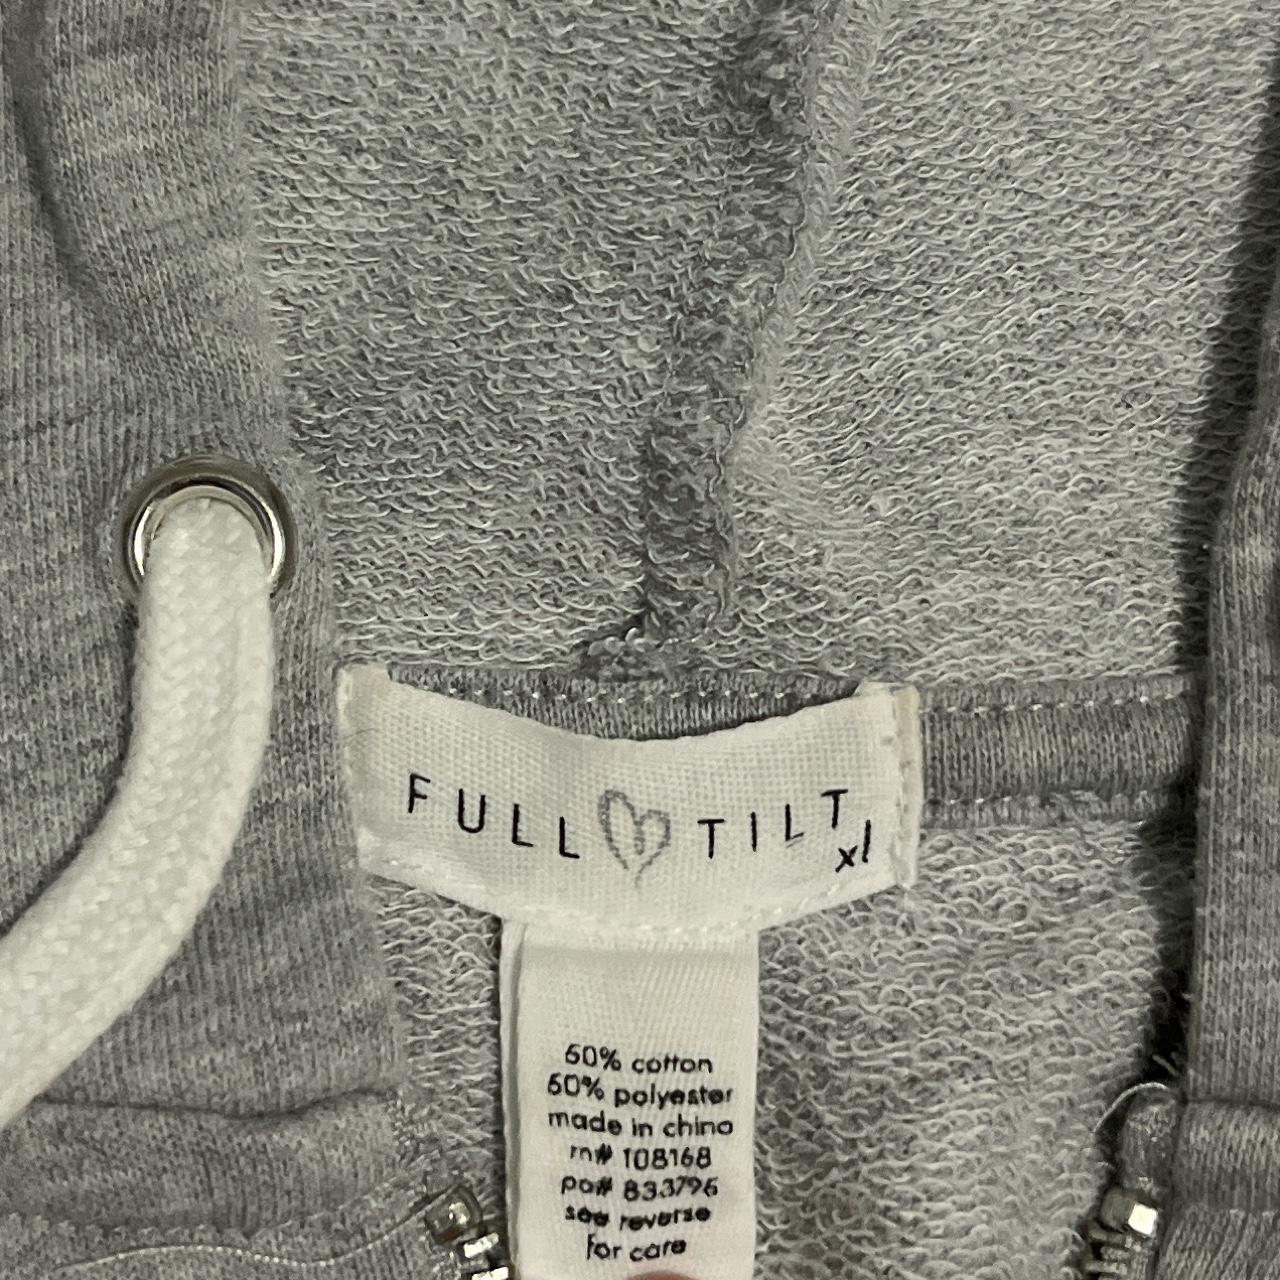 Product Image 2 - Full tilt Cropped zip up
Grey
Never